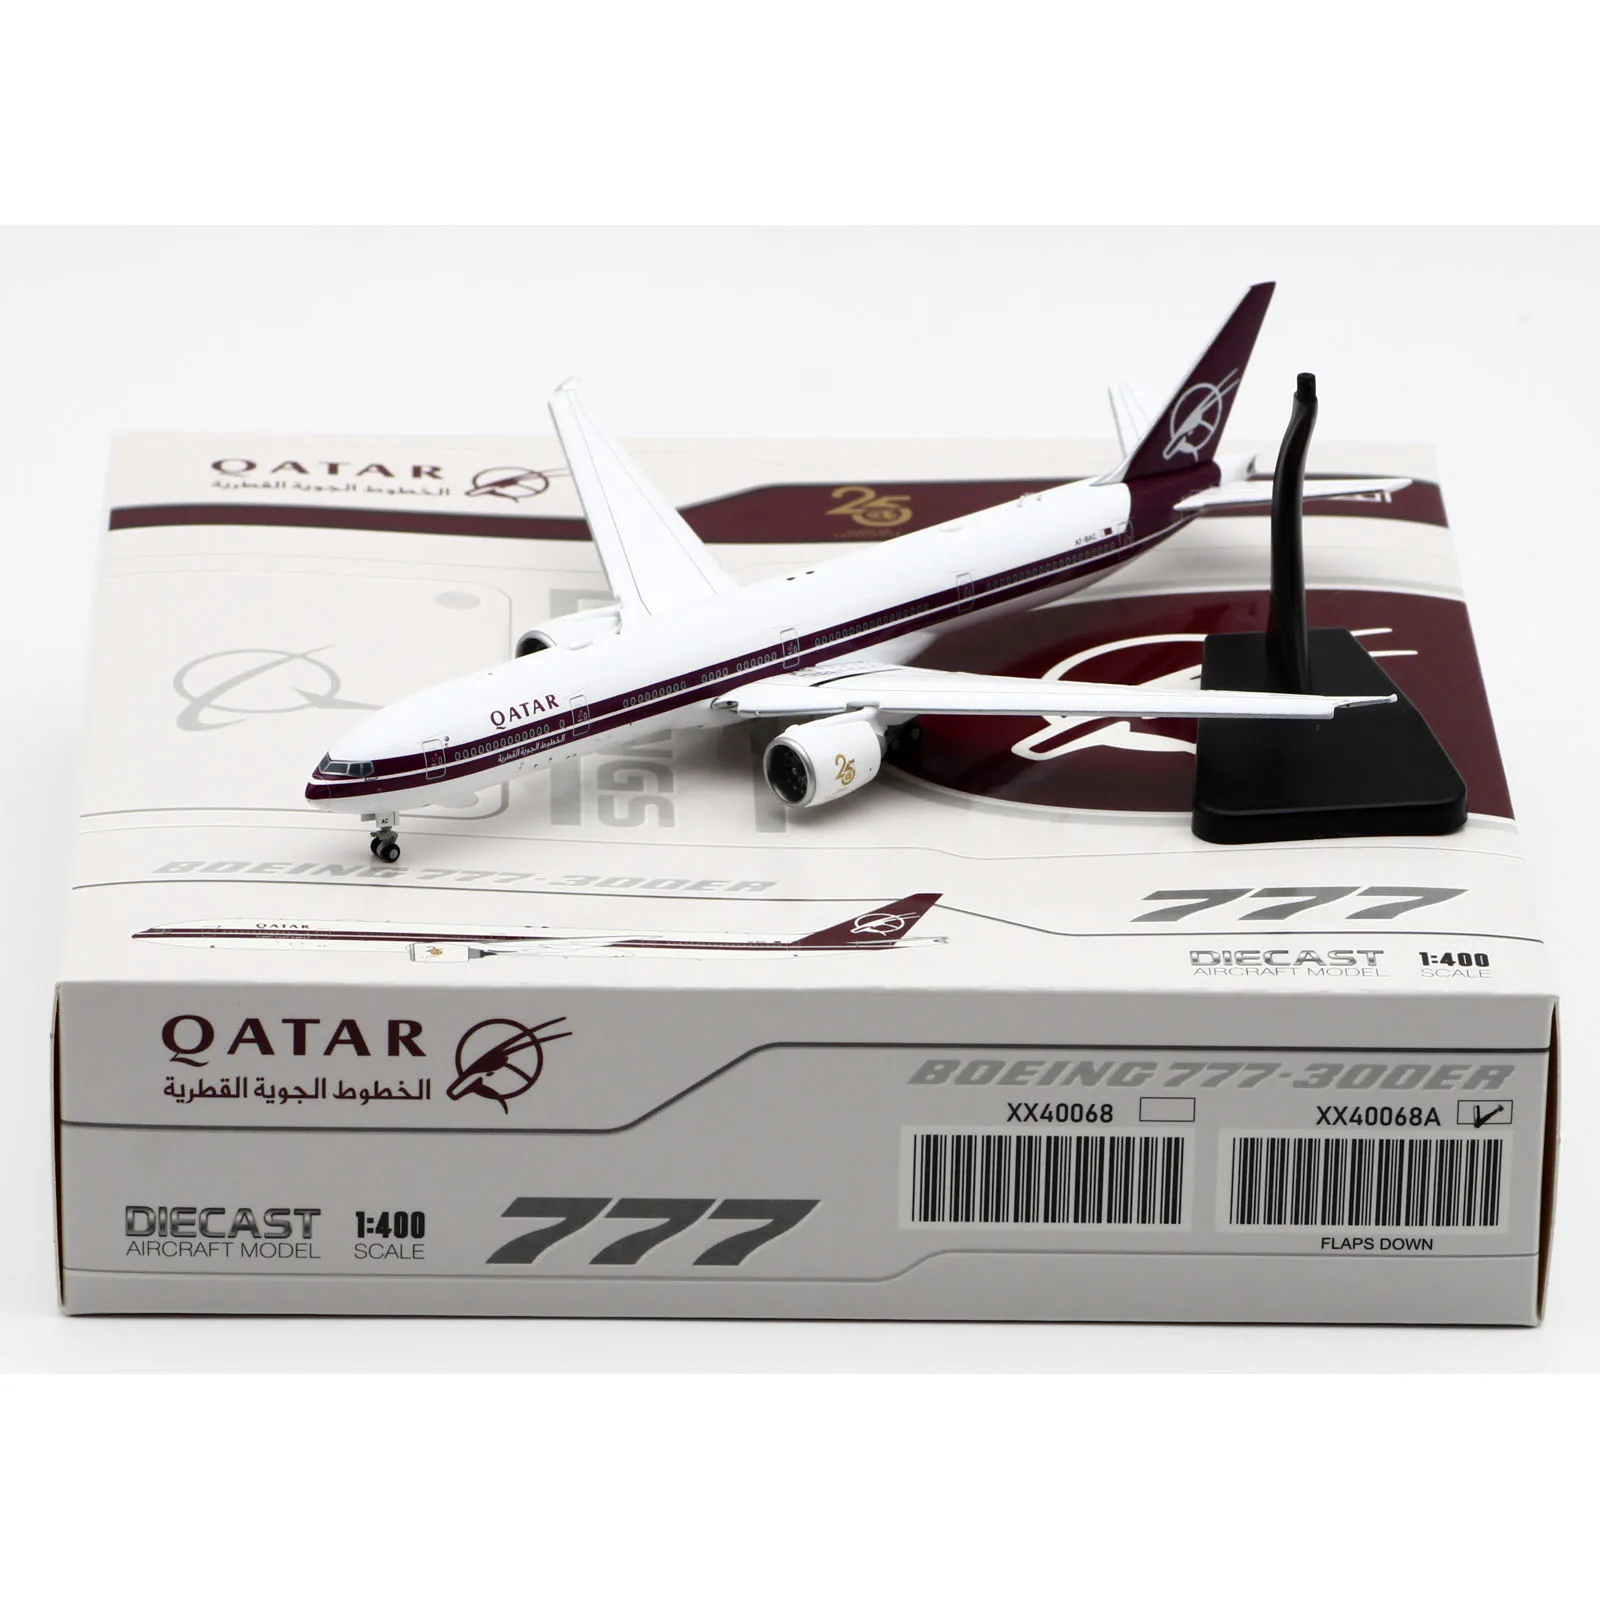 

XX40068A Alloy Collectible Plane Gift JC Wings 1:400 QATAR AIRWAYS Boeing B777-300er Diecast Aircraft Model A7-BAC Flaps Down